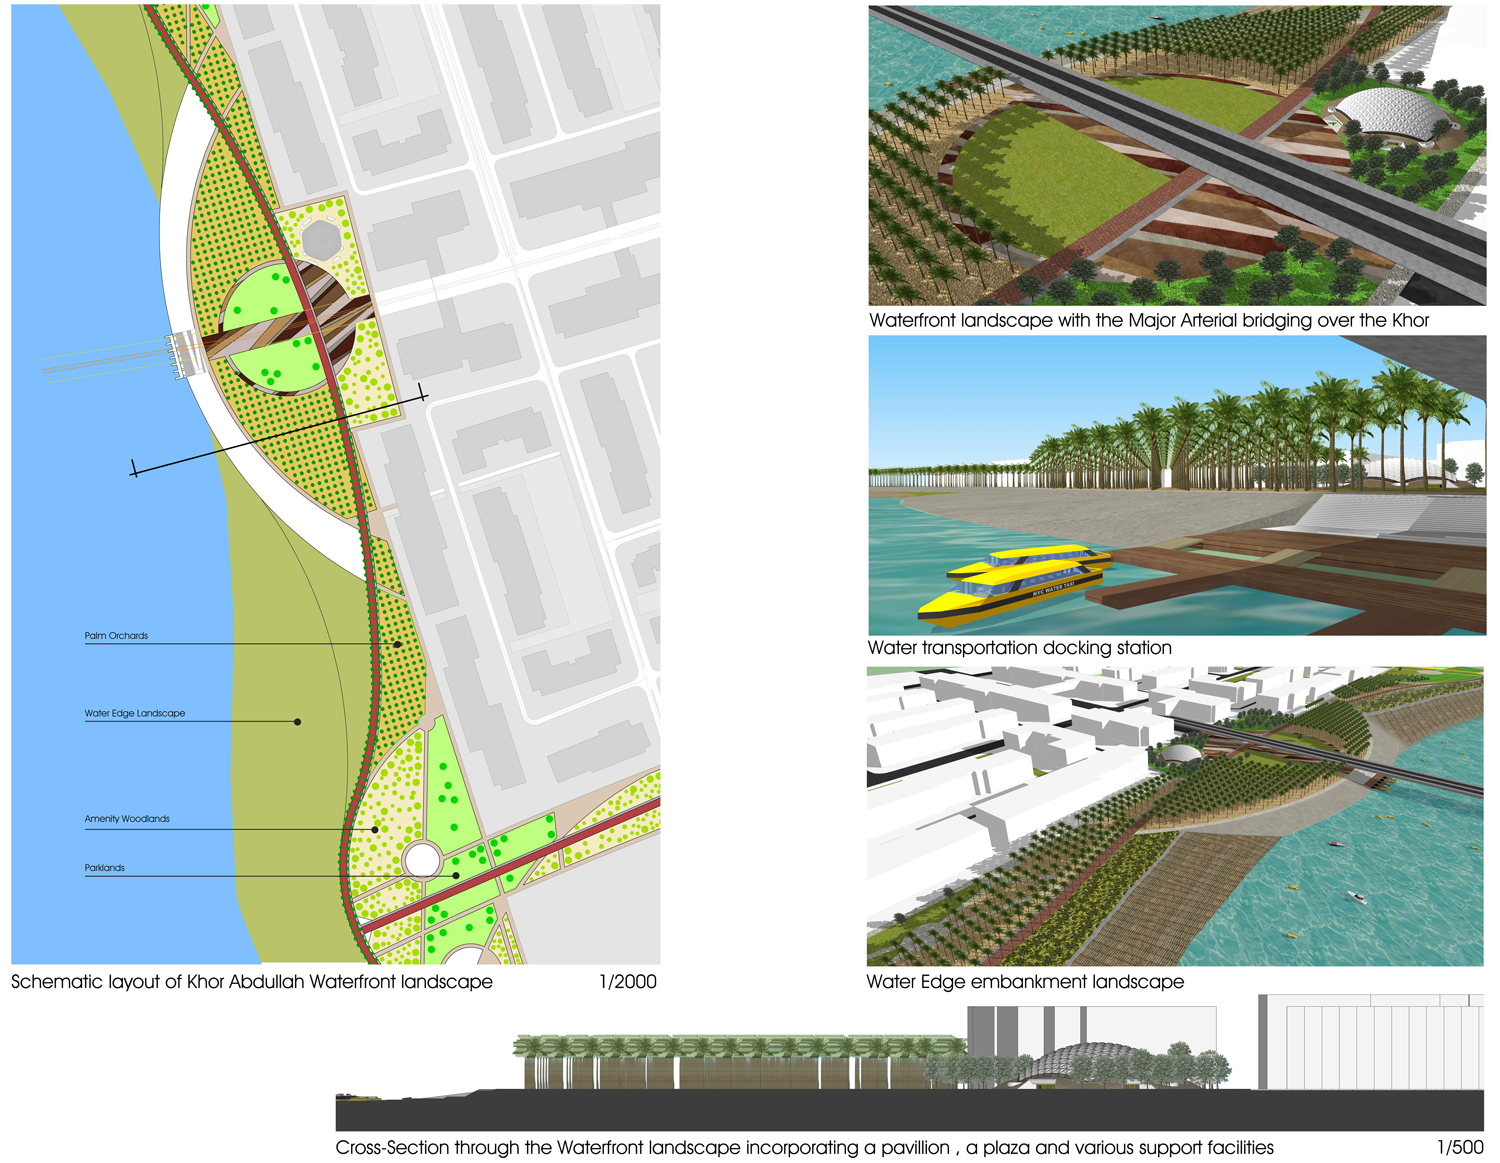 Khor Abdallah waterfront landscape. Landscape typologies are responsive to local ecological and climatic restrictions and include: date palm orchards; arid zone tree landscapes; exotic landscape kept to a minimum located strategically to maximize their visual impact